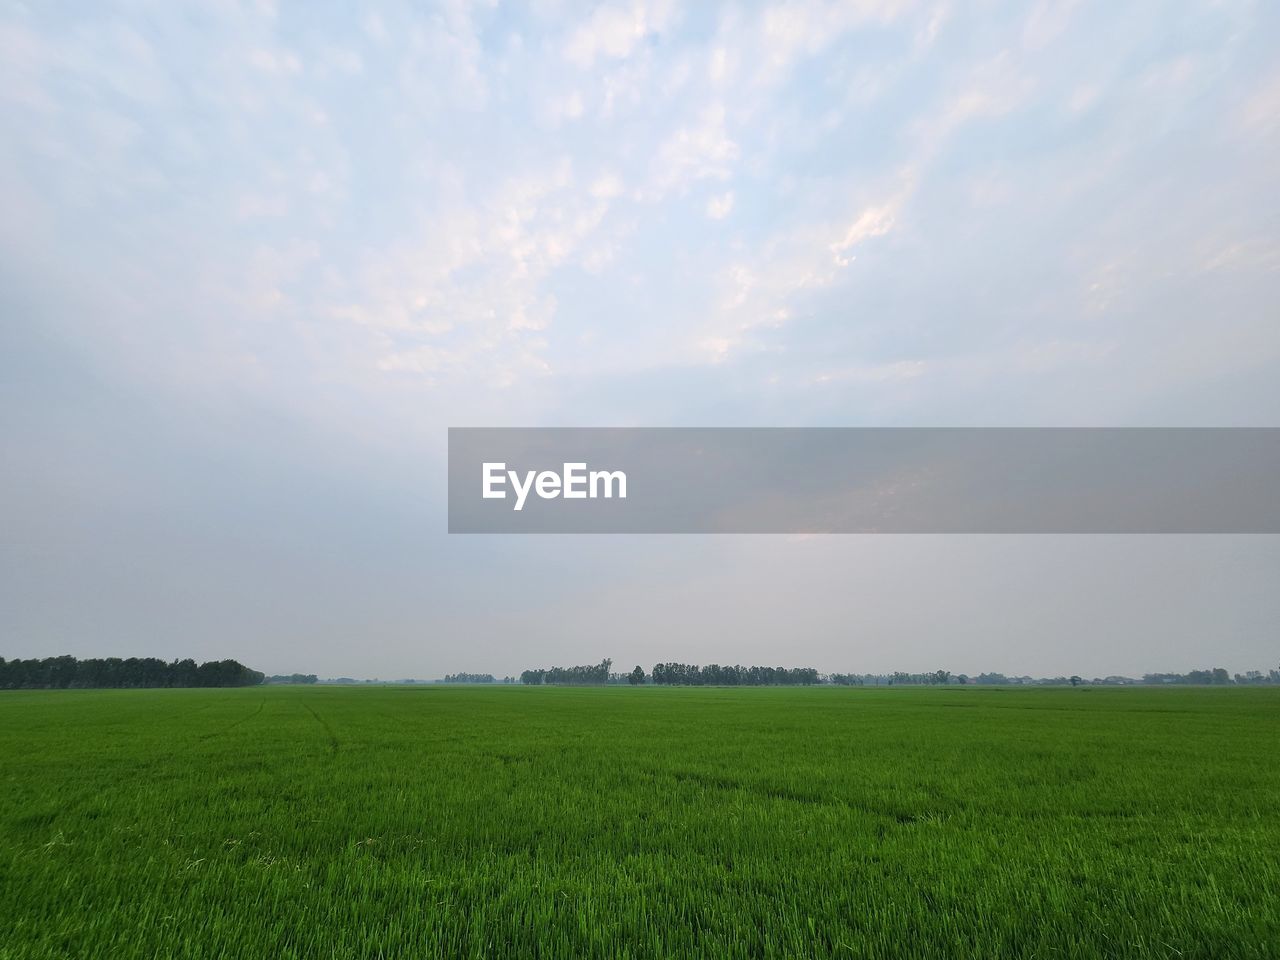 sky, environment, horizon, landscape, field, plain, grassland, land, plant, cloud, agriculture, rural scene, nature, green, beauty in nature, prairie, grass, scenics - nature, growth, pasture, tranquility, meadow, crop, natural environment, no people, rural area, sunlight, paddy field, cereal plant, farm, outdoors, morning, tranquil scene, food and drink, social issues, day, food, hill, steppe, horizon over land, environmental conservation, freshness, non-urban scene